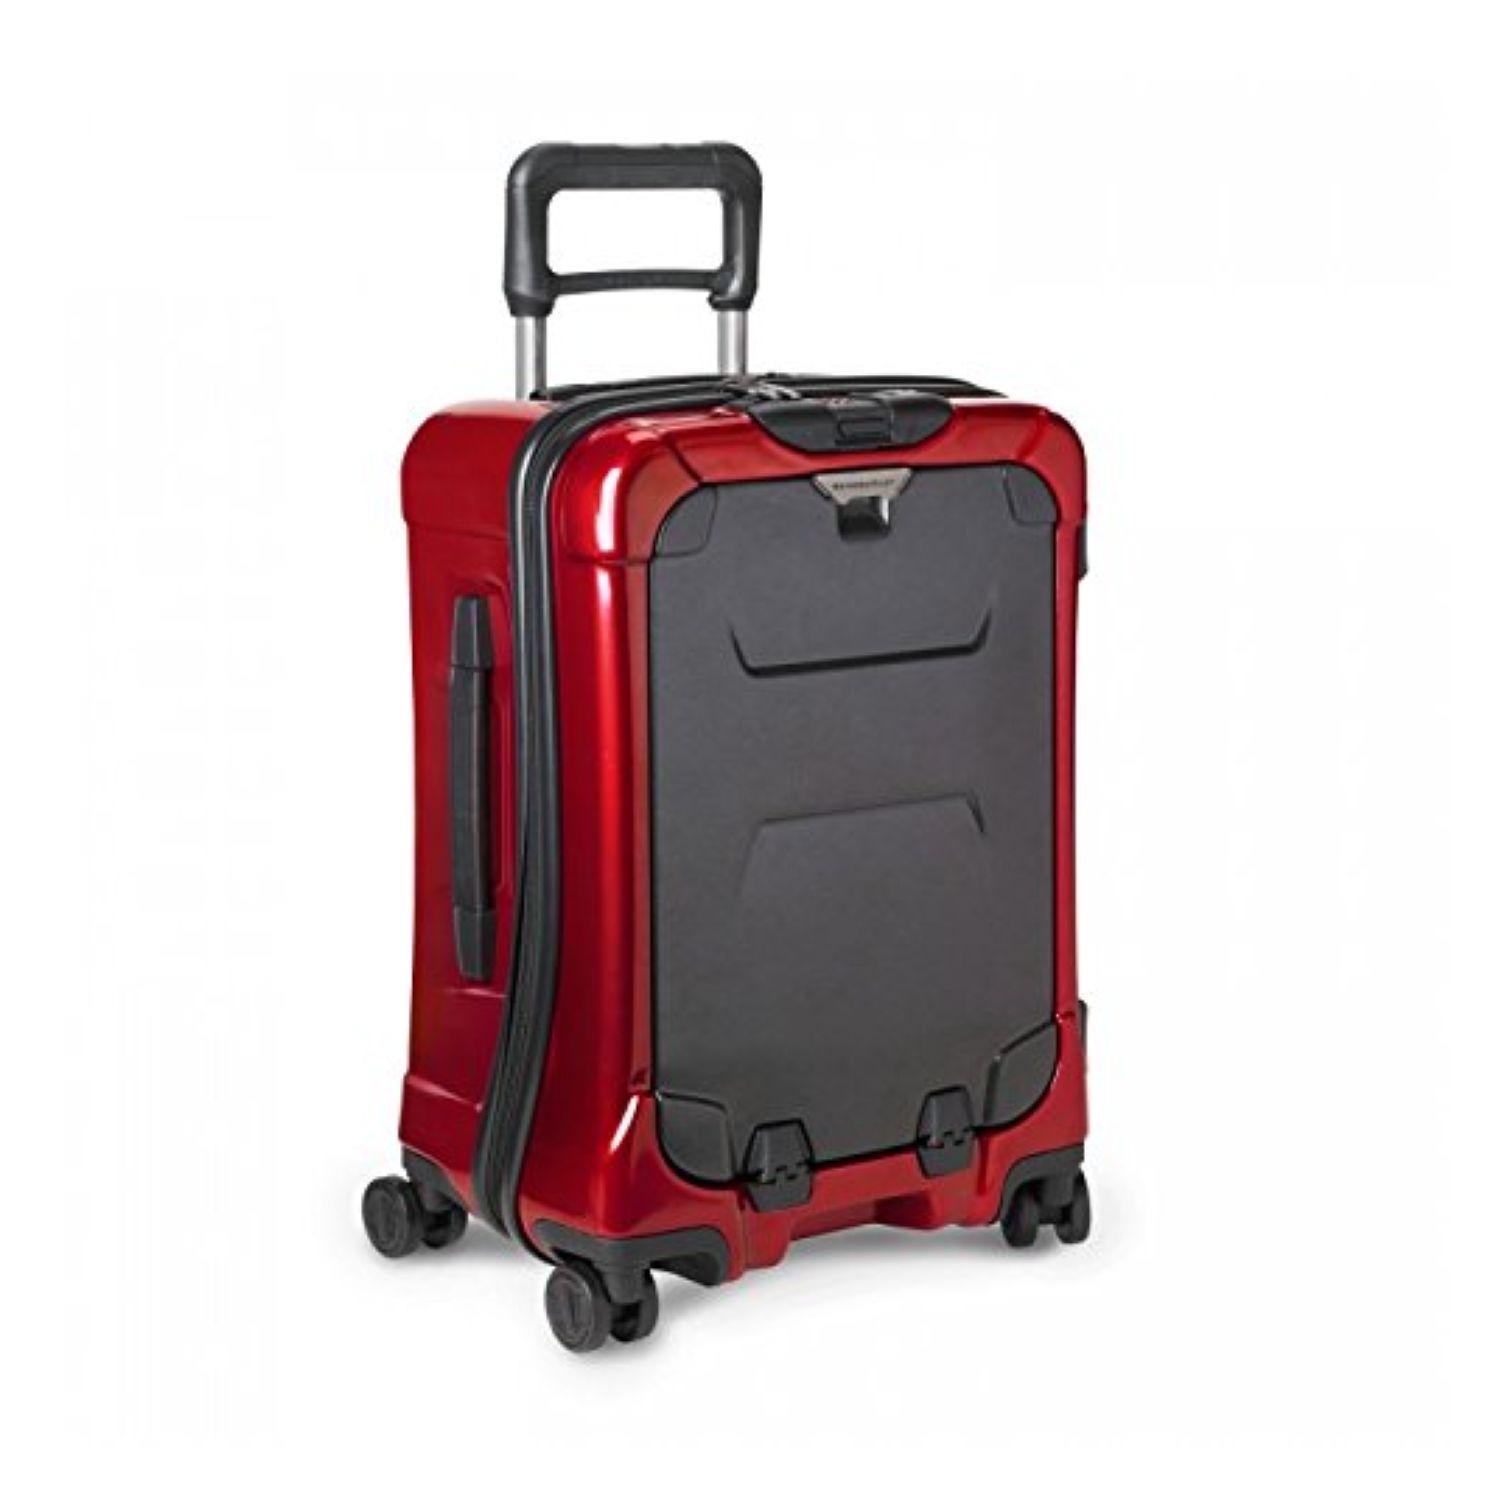 Briggs & Riley Torq Intl Carry-On Spinner (Ruby) - Seager Inc